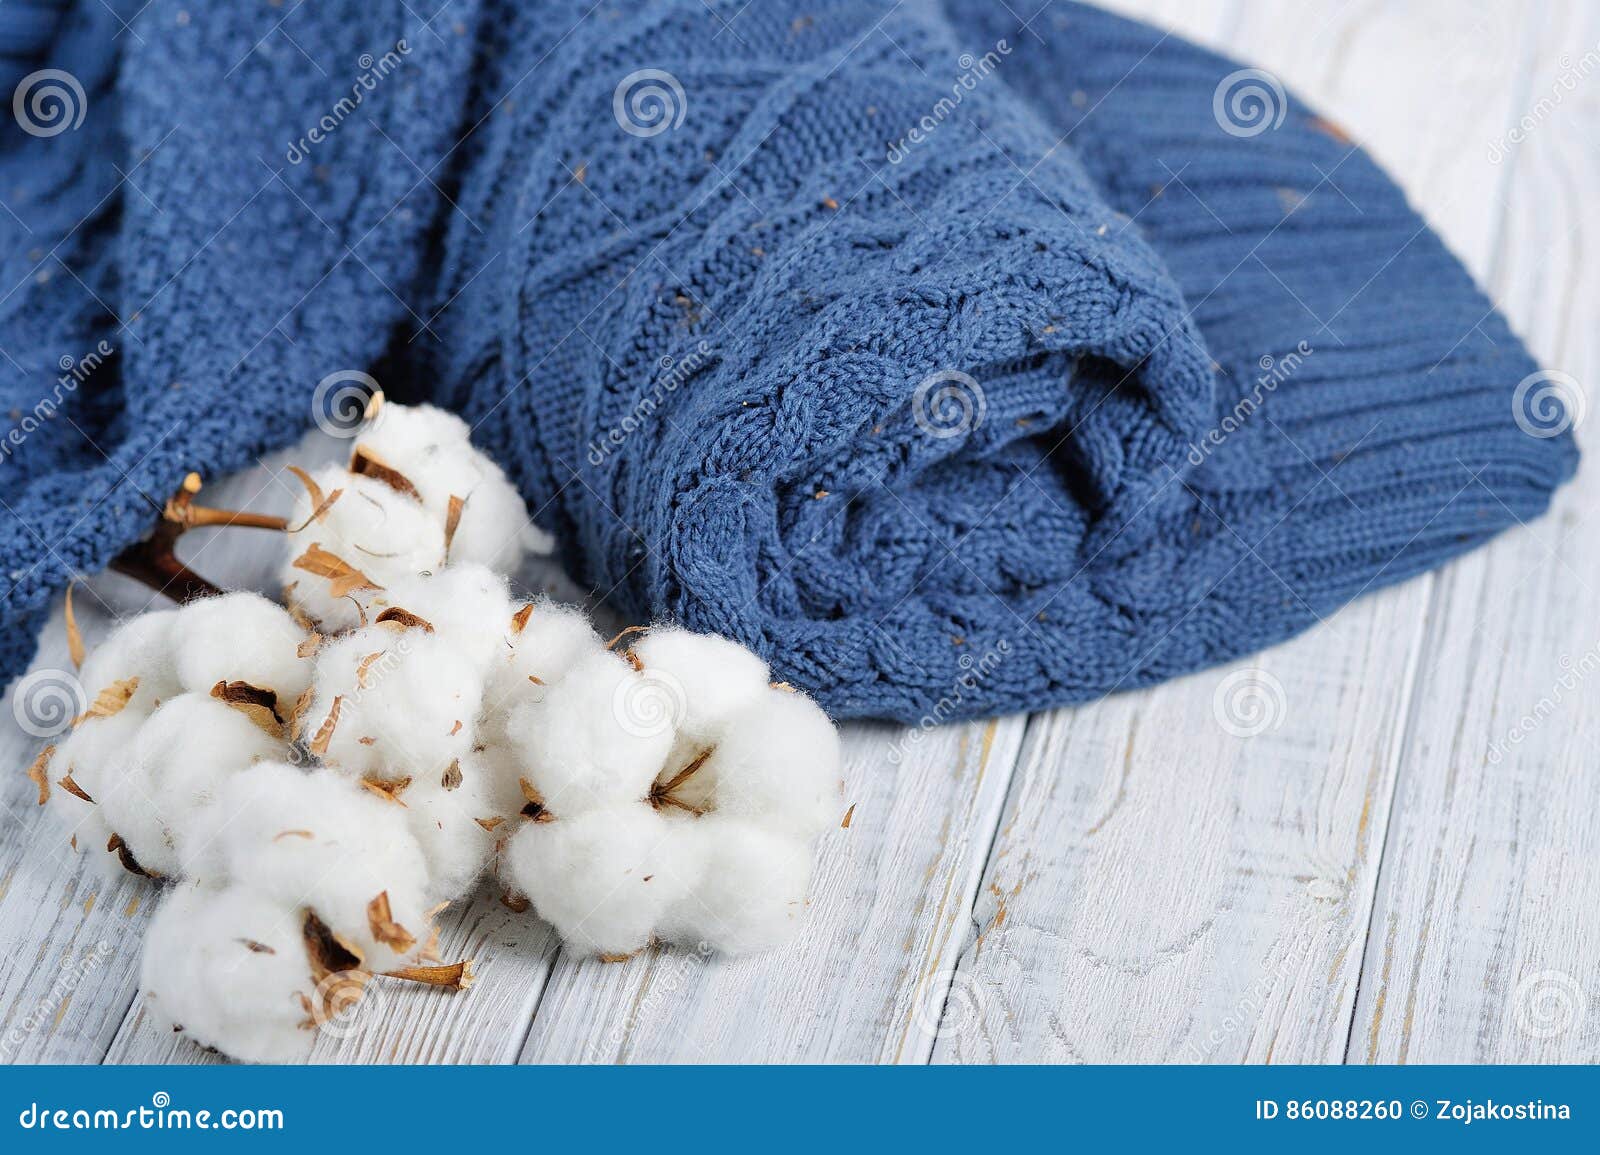 Knitted Sweater and Delicate White Cotton Flowers Stock Photo - Image ...